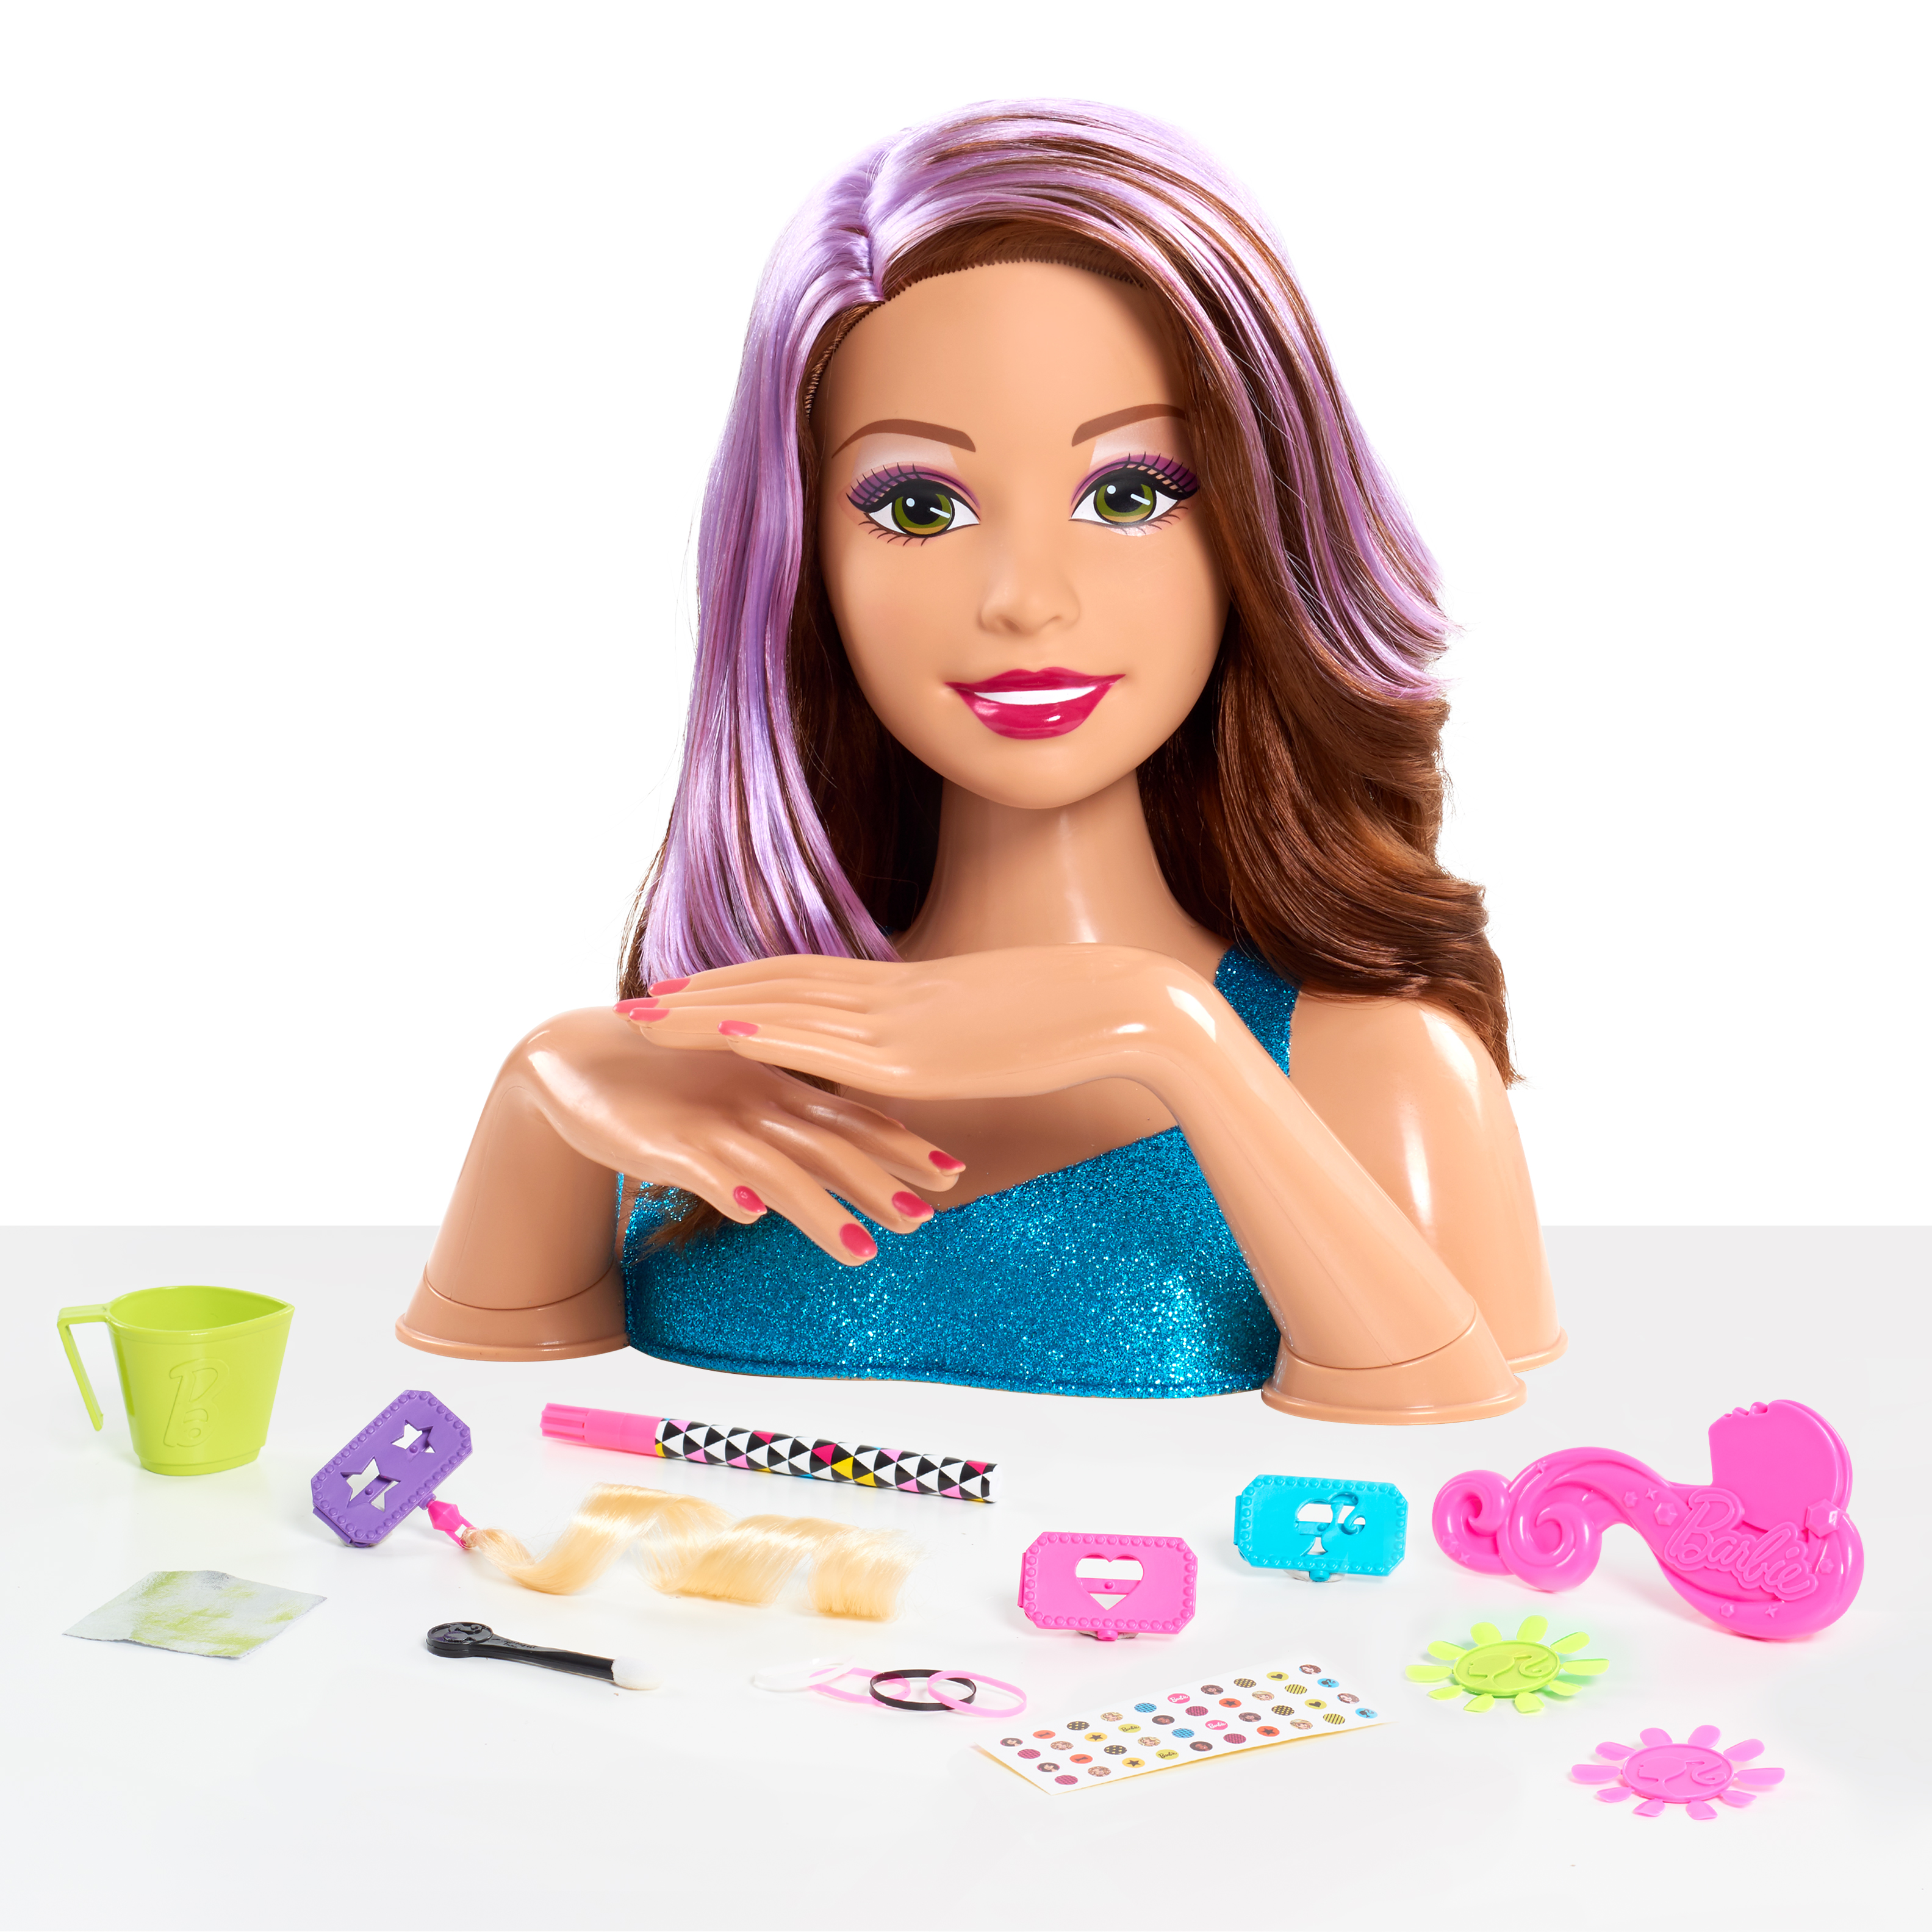 BARBIE Doll Princess Styling Head - Online Shopping ...